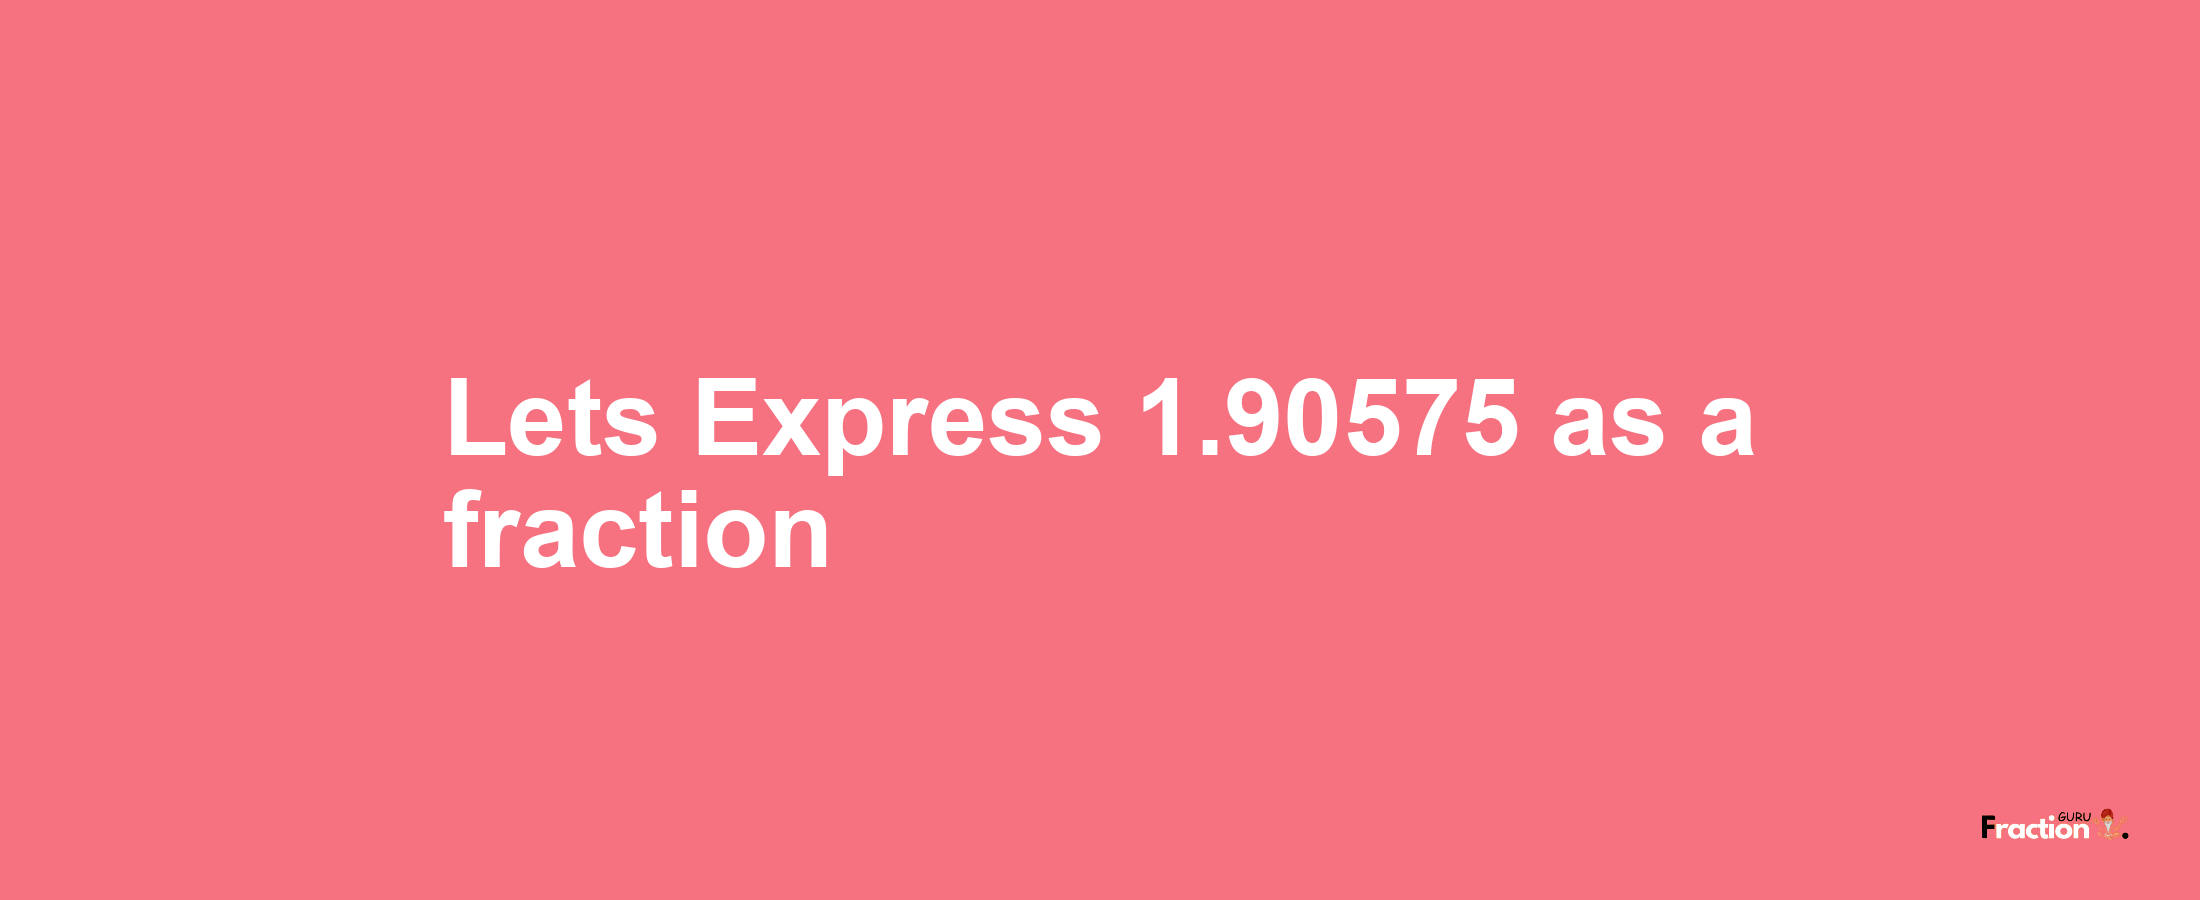 Lets Express 1.90575 as afraction